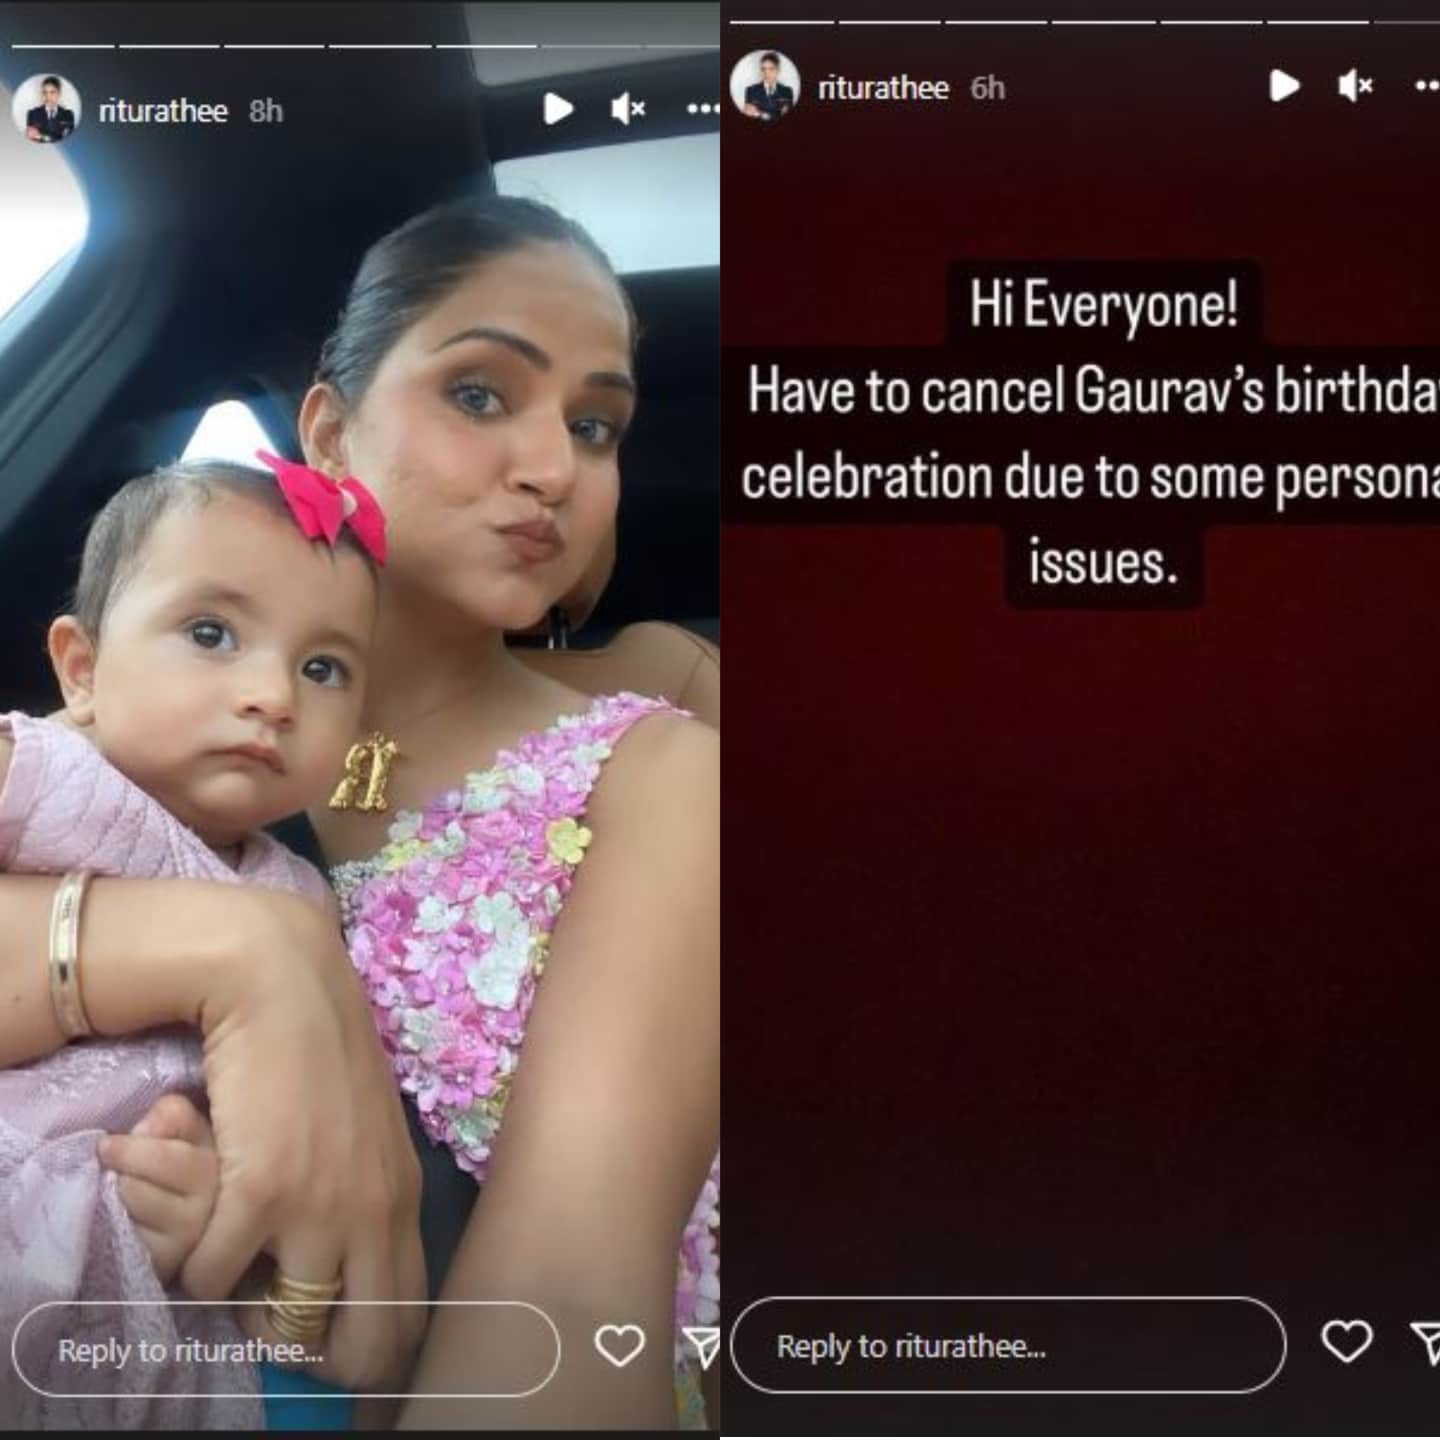 Ritu also posted a photo as she travelled with her daughter to the metro station.